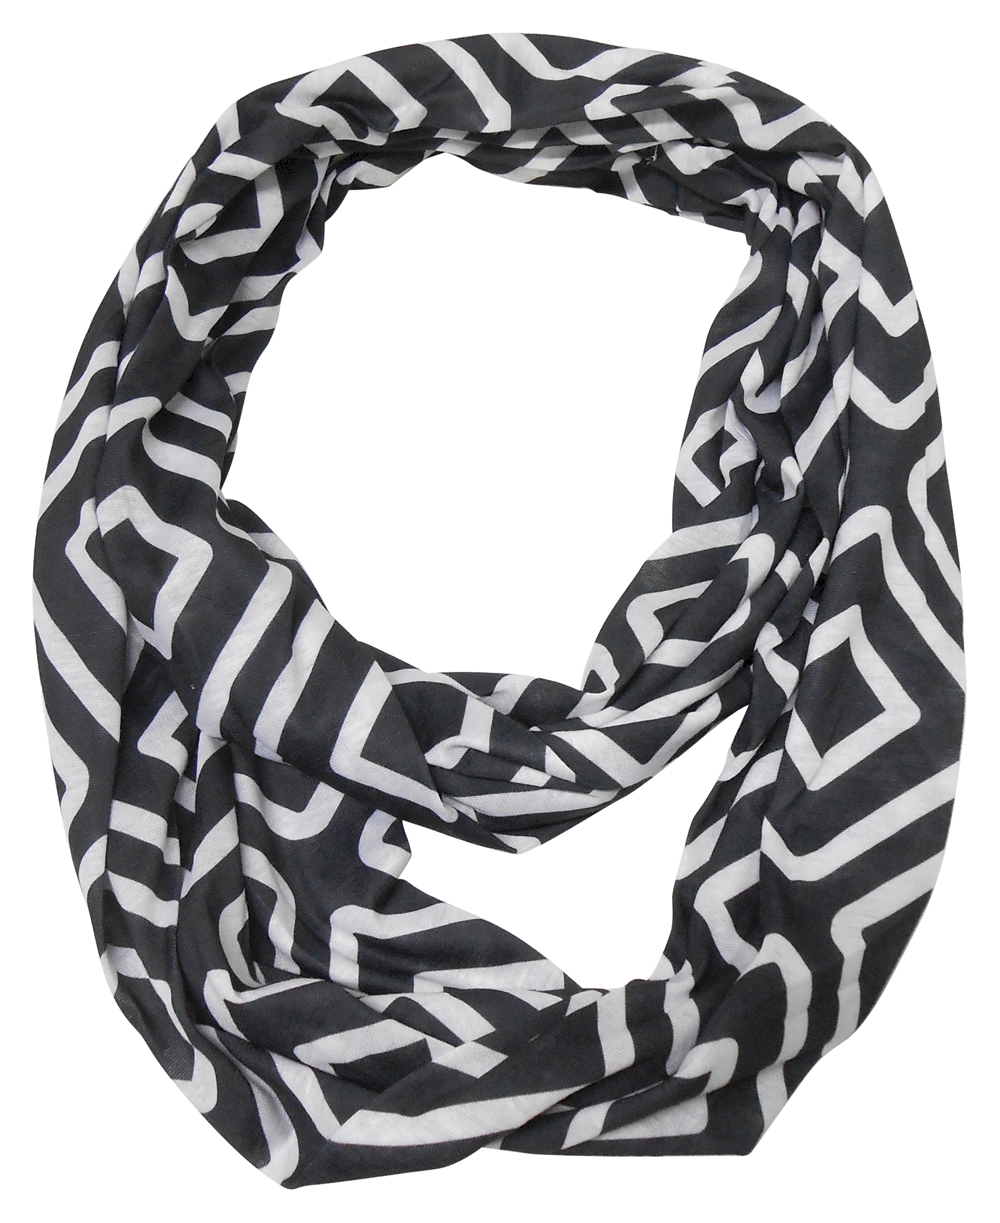 Concentric Squares Print Jersey Knit Infinity Scarf Embroidery Blanks - BLACK - CLOSEOUT